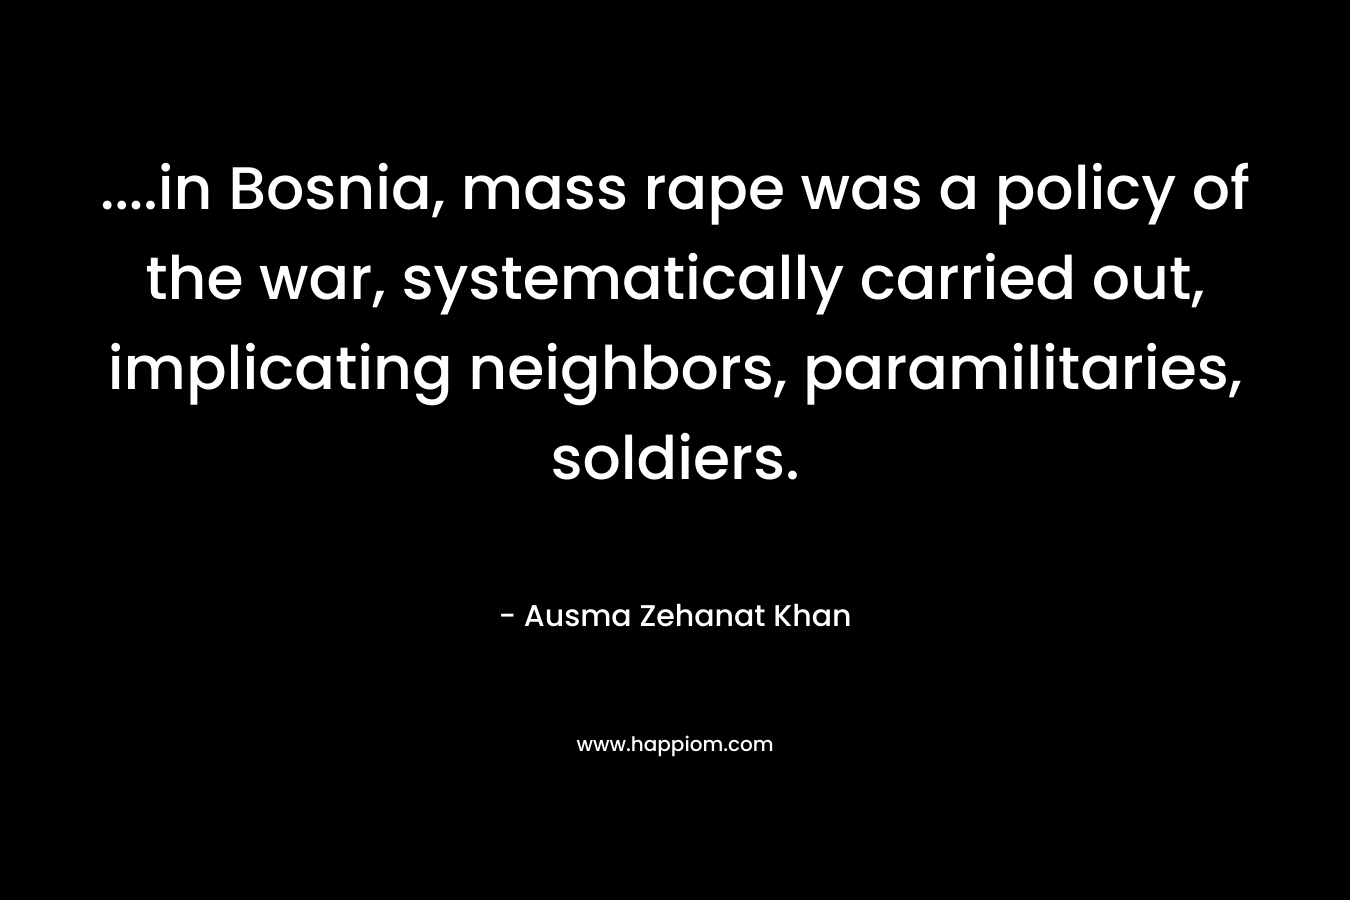 ....in Bosnia, mass rape was a policy of the war, systematically carried out, implicating neighbors, paramilitaries, soldiers.